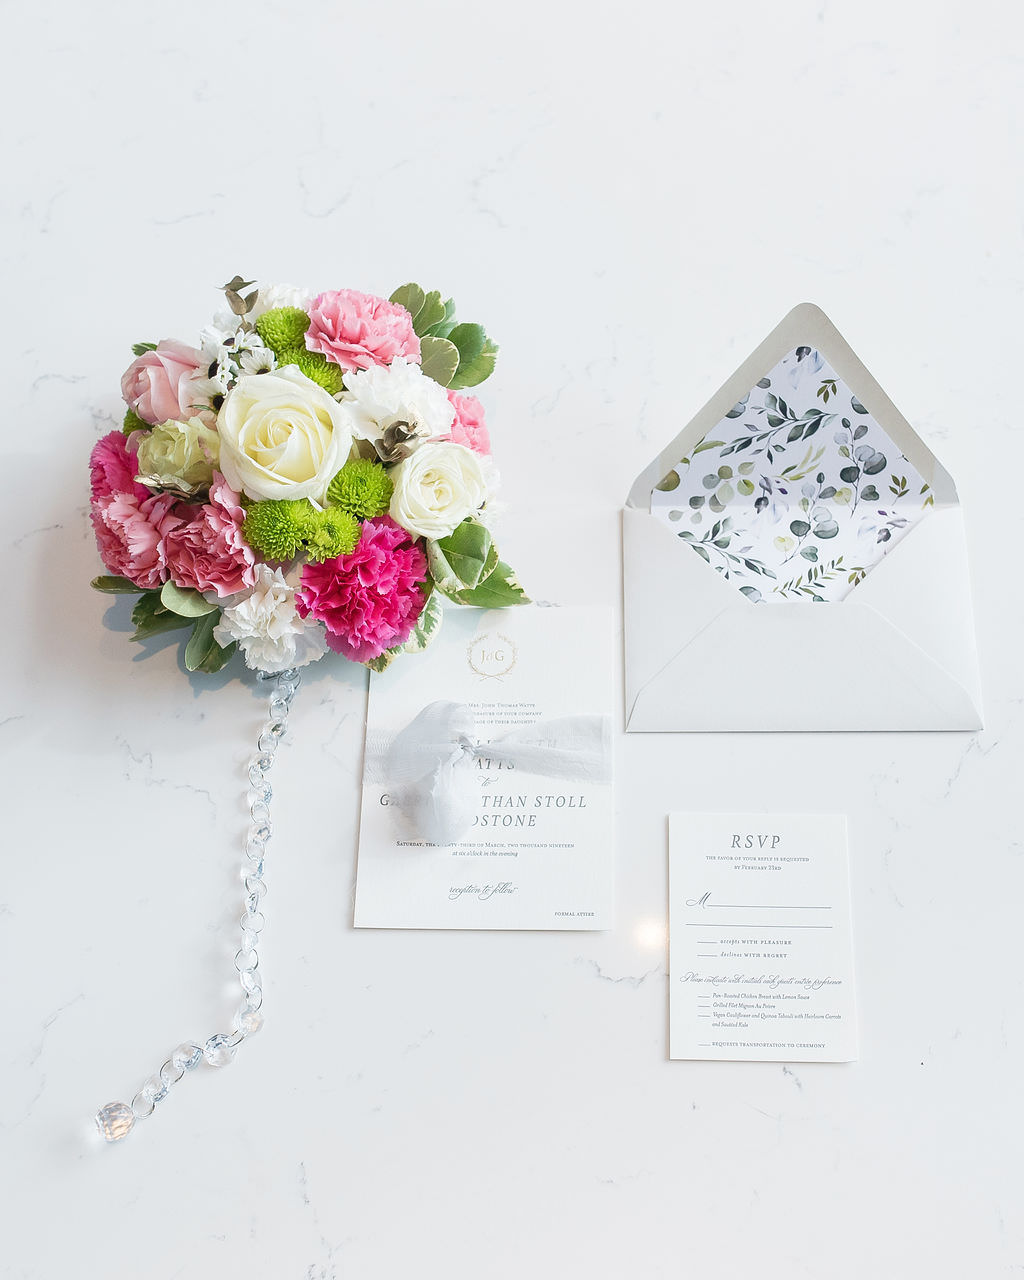 Classic Elegant Floral Envelope Liner, Grey and White Modern Wedding Invitation Suite, Colorful Pink, Blush Pink, Ivory Rose and Greenery Floral Bridal Bouquet with Crystals | St. Pete Wedding Photographer Kristen Marie Photography | Downtown St. Pete Wedding Florist Brides N Blooms | Wedding Stationery and Invitations A&P Design Co